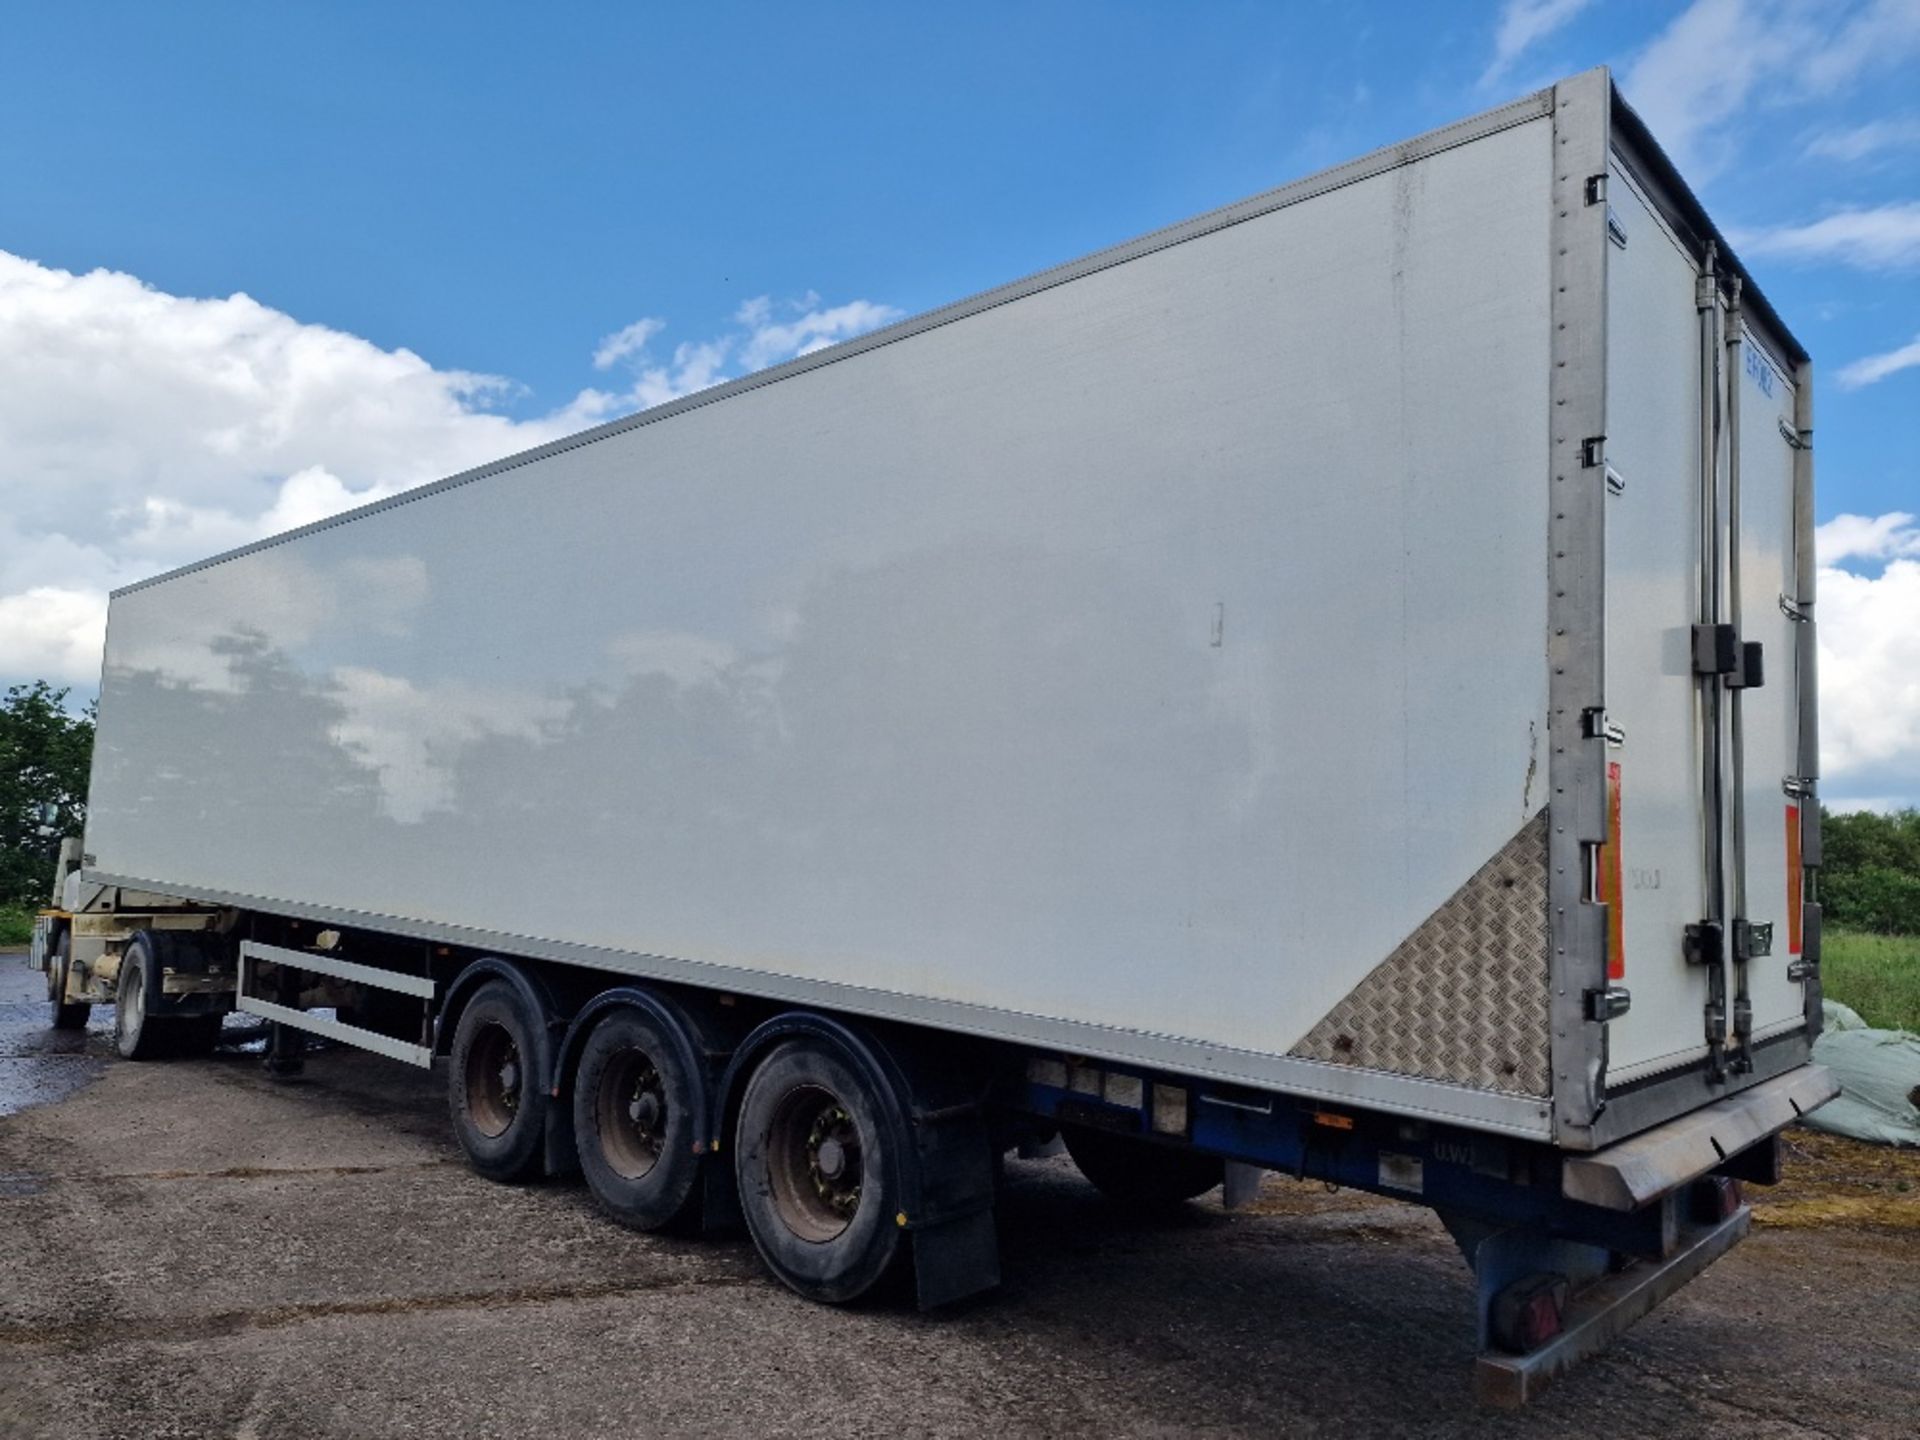 EF082 – 2009 Montracon 13.6m Refrigerated Trailer